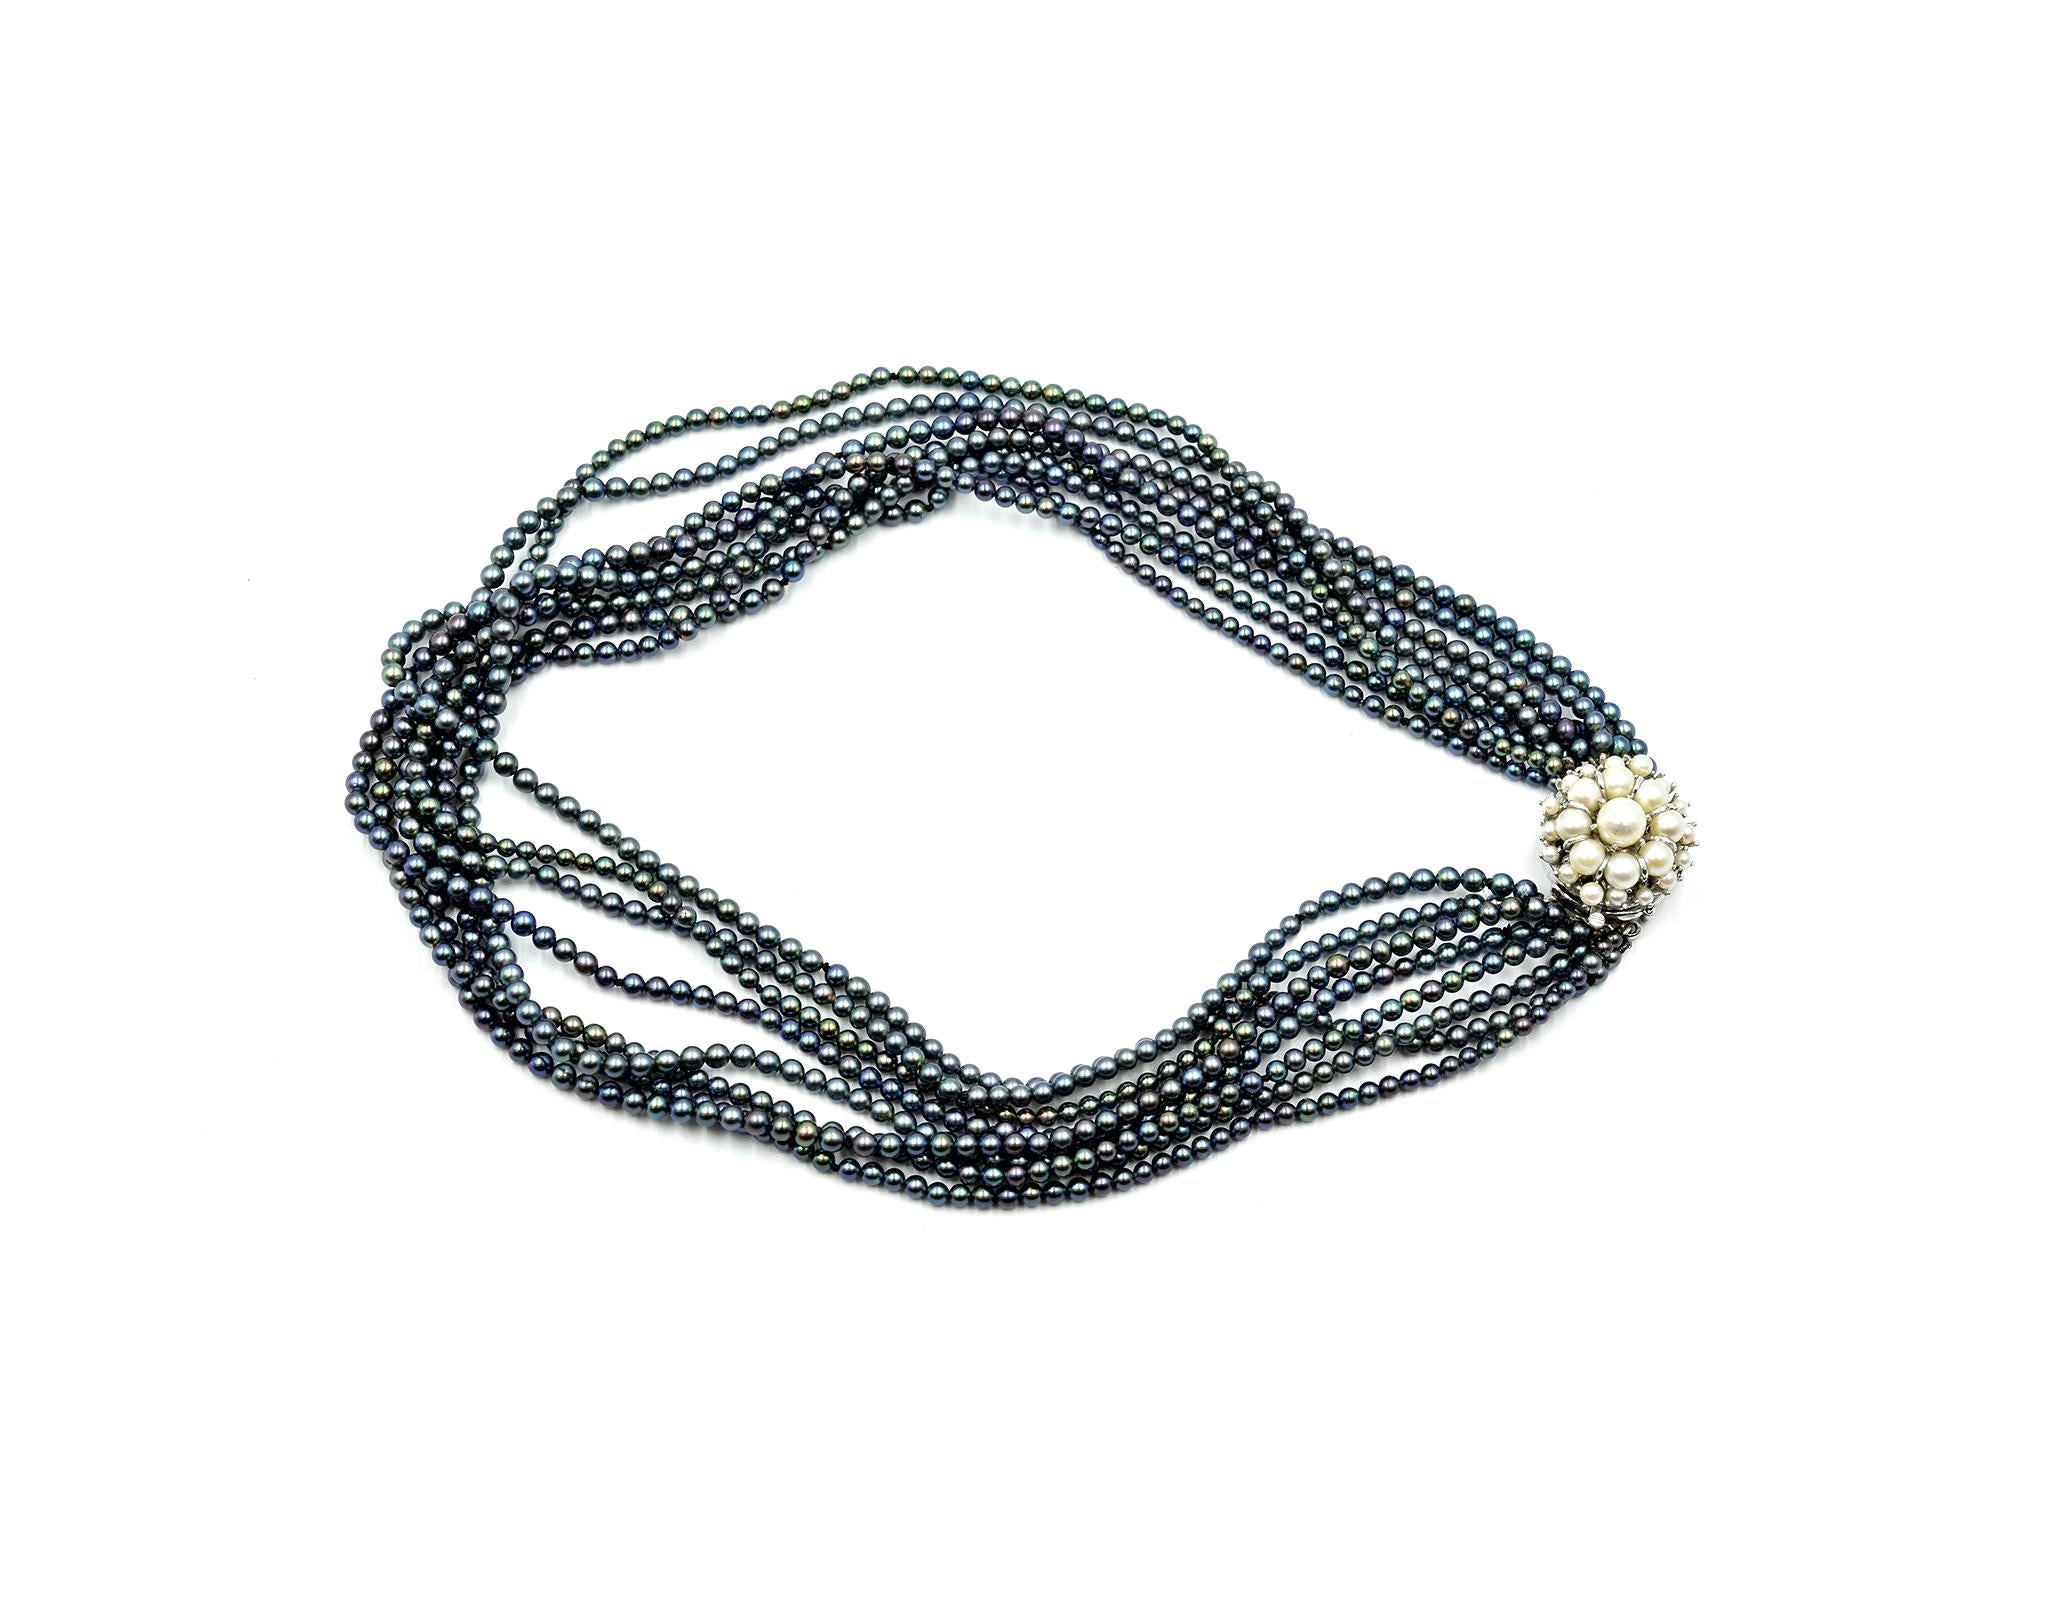 Women's Black Dyed Pearl Strand Necklace with 14 Karat White Gold Pearl Accented Clasp